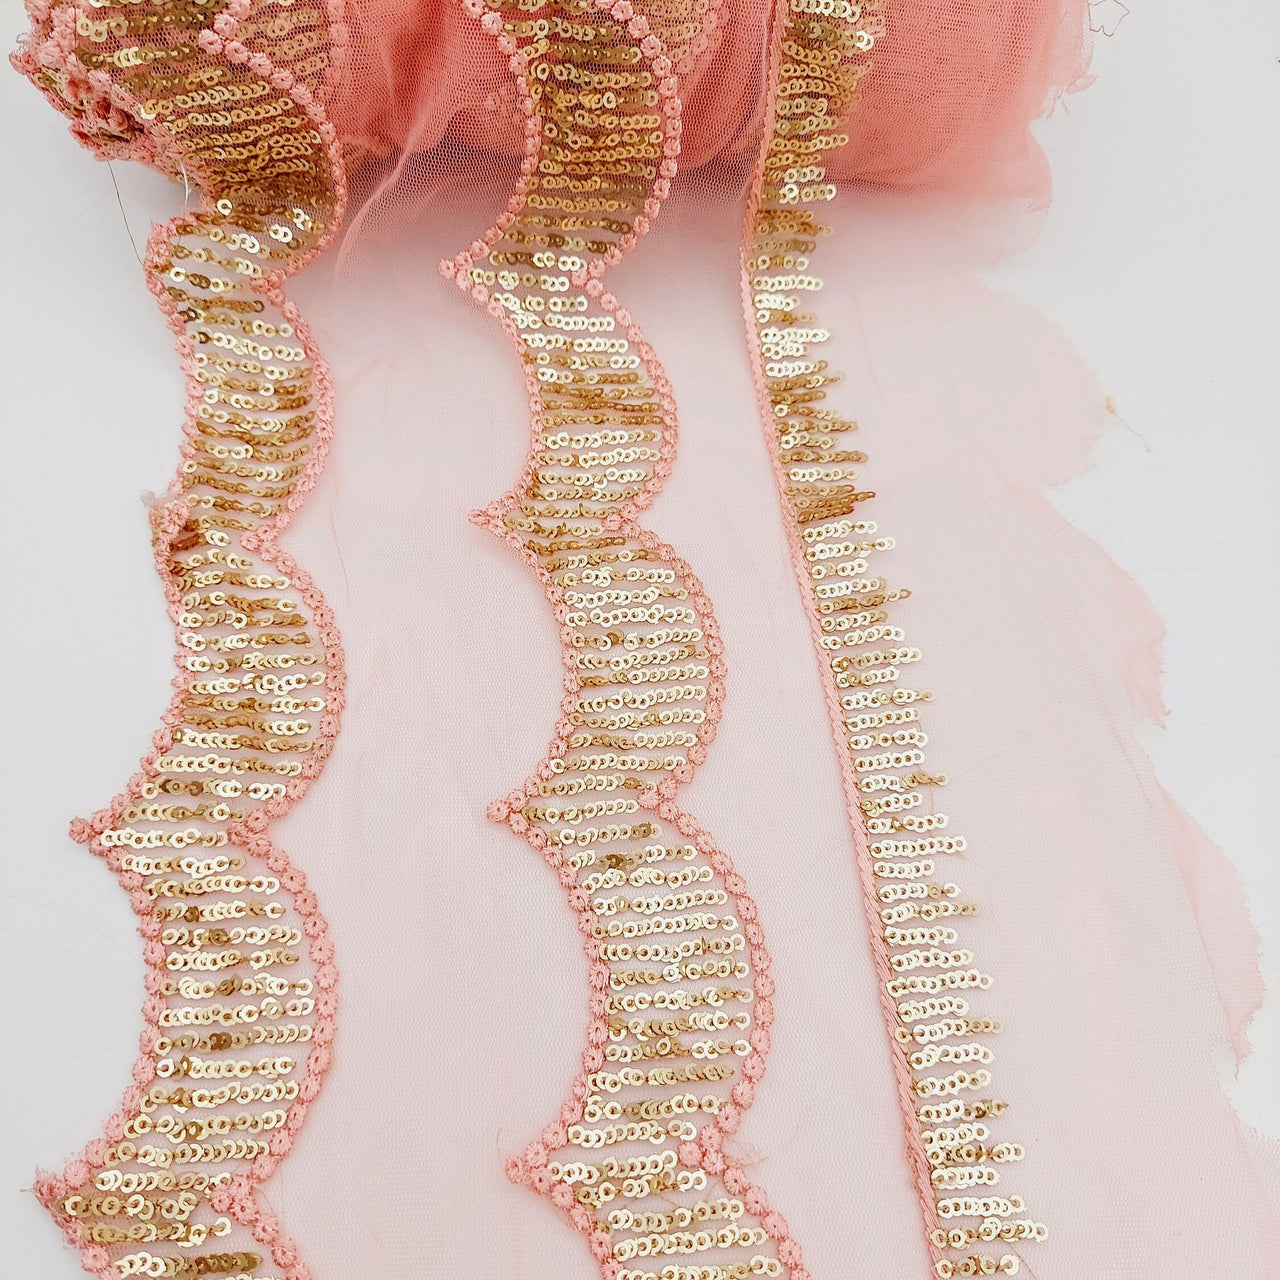 Salmon Pink Net Scallop Lace Trim with Gold Sequins, Sari Border, Embroidered Trim